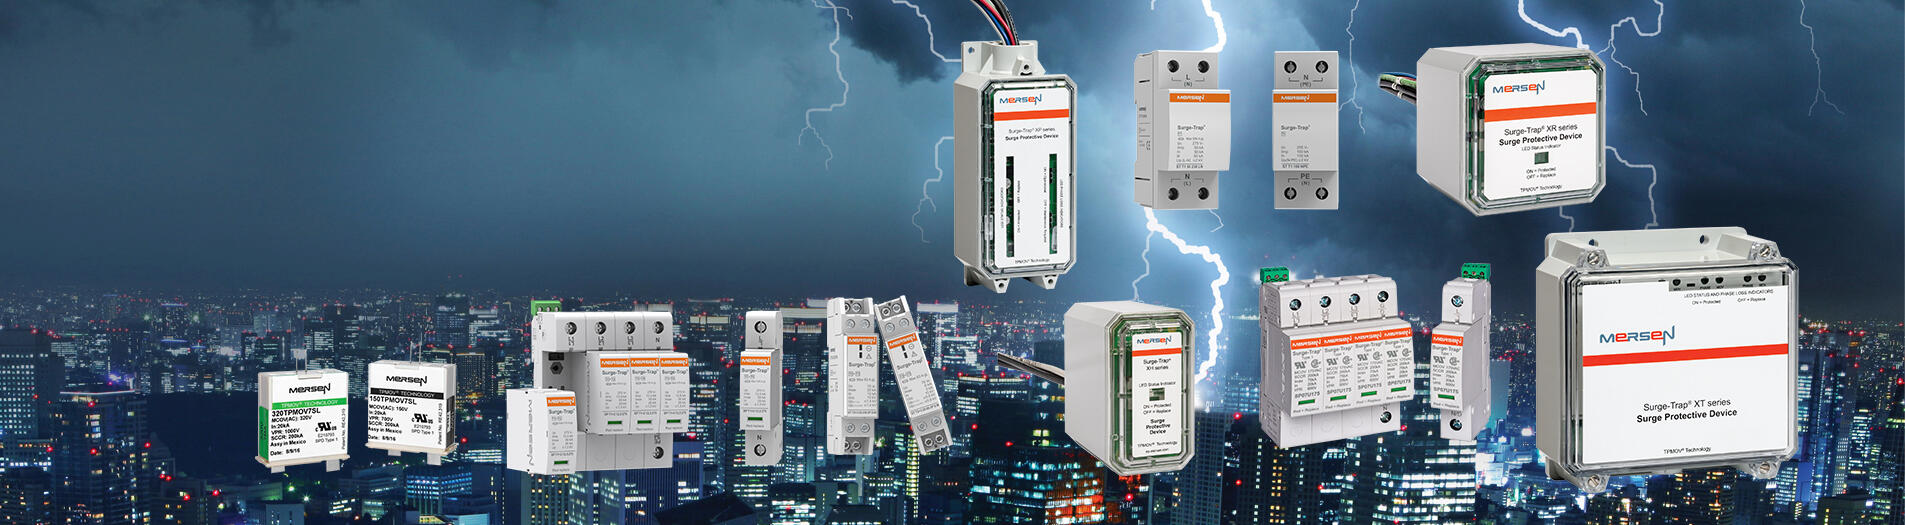 Home page banner showing global surge protection products